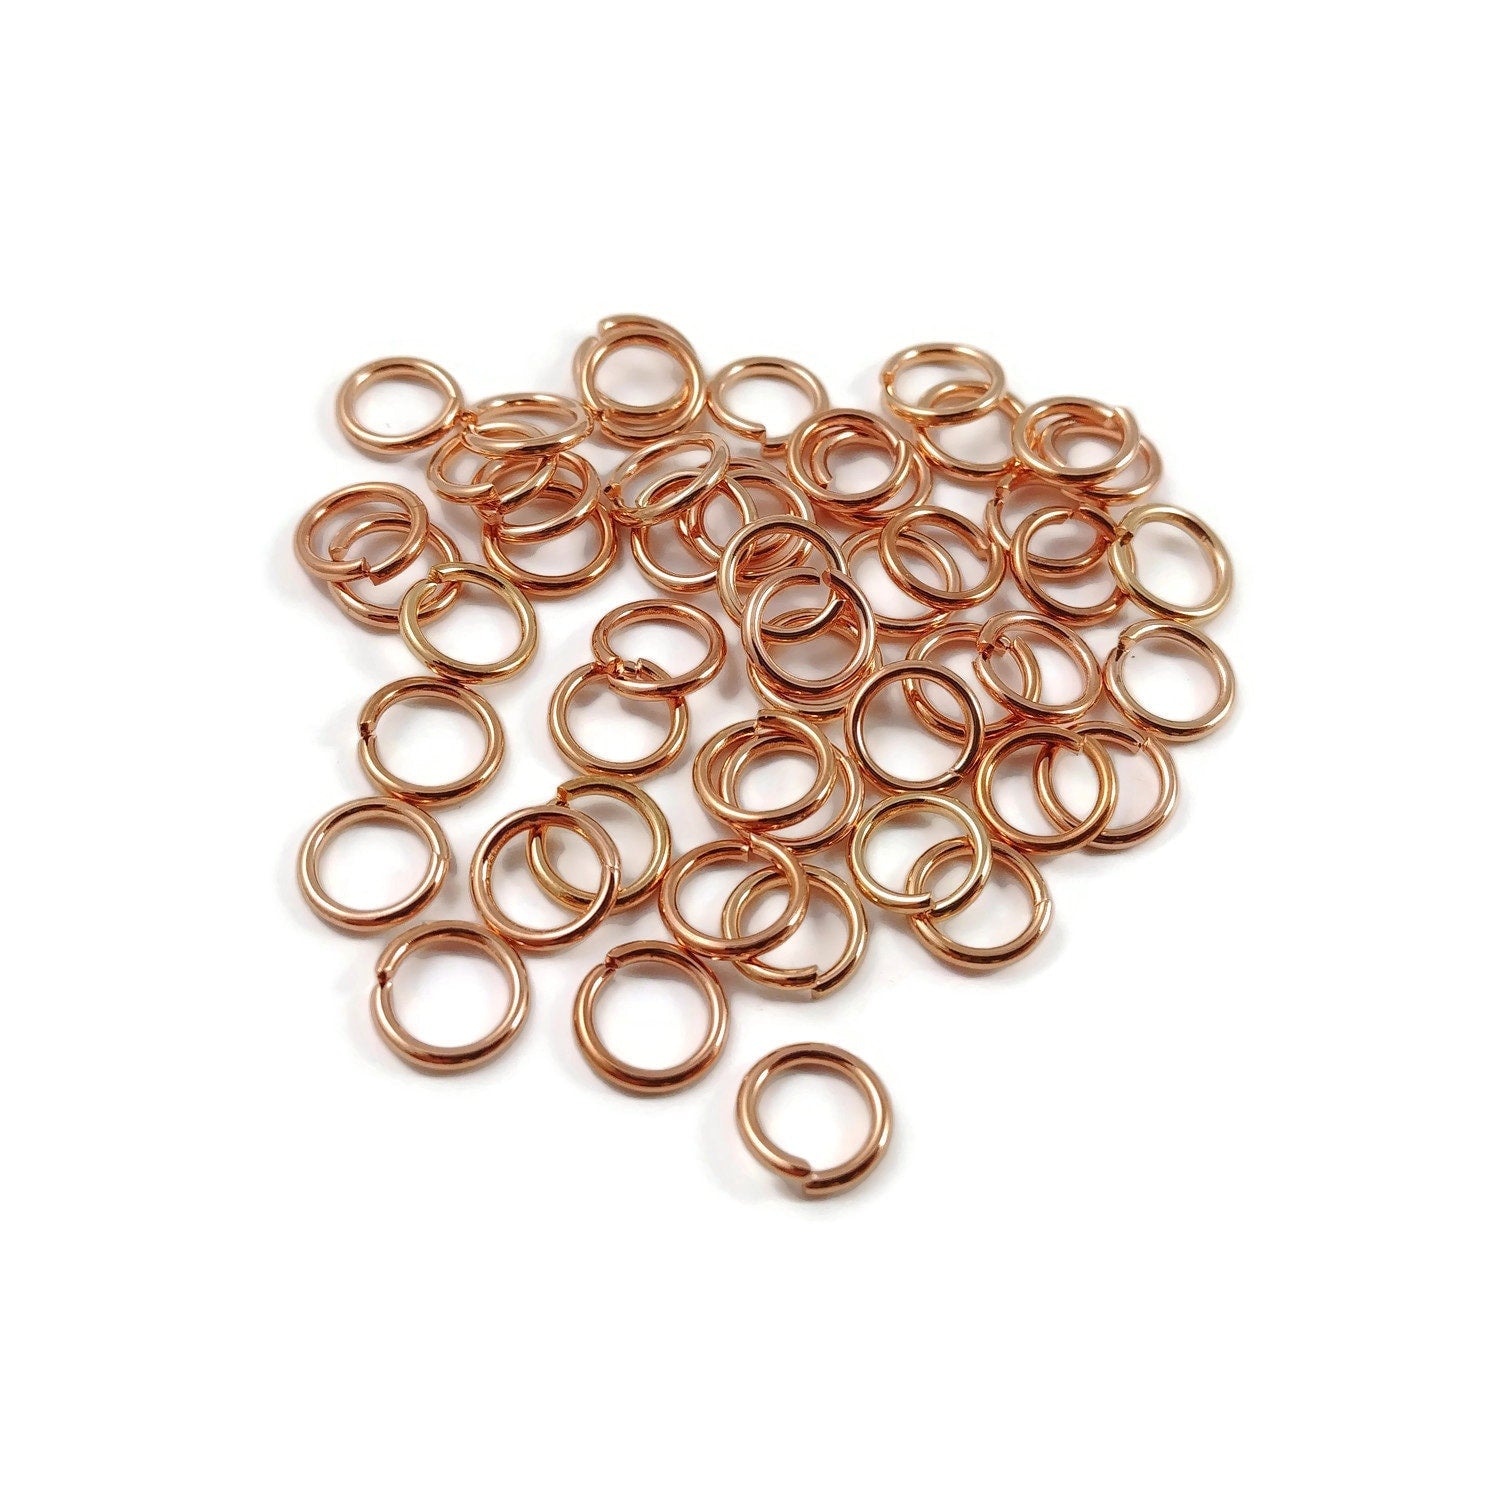 Large Gold Jump Rings, 12mm Jump Rings, 22k Gold Plated Jump Rings, Split  Jump Rings, Open Jump Ring Connectors, Jewelry Findings, 20pc 